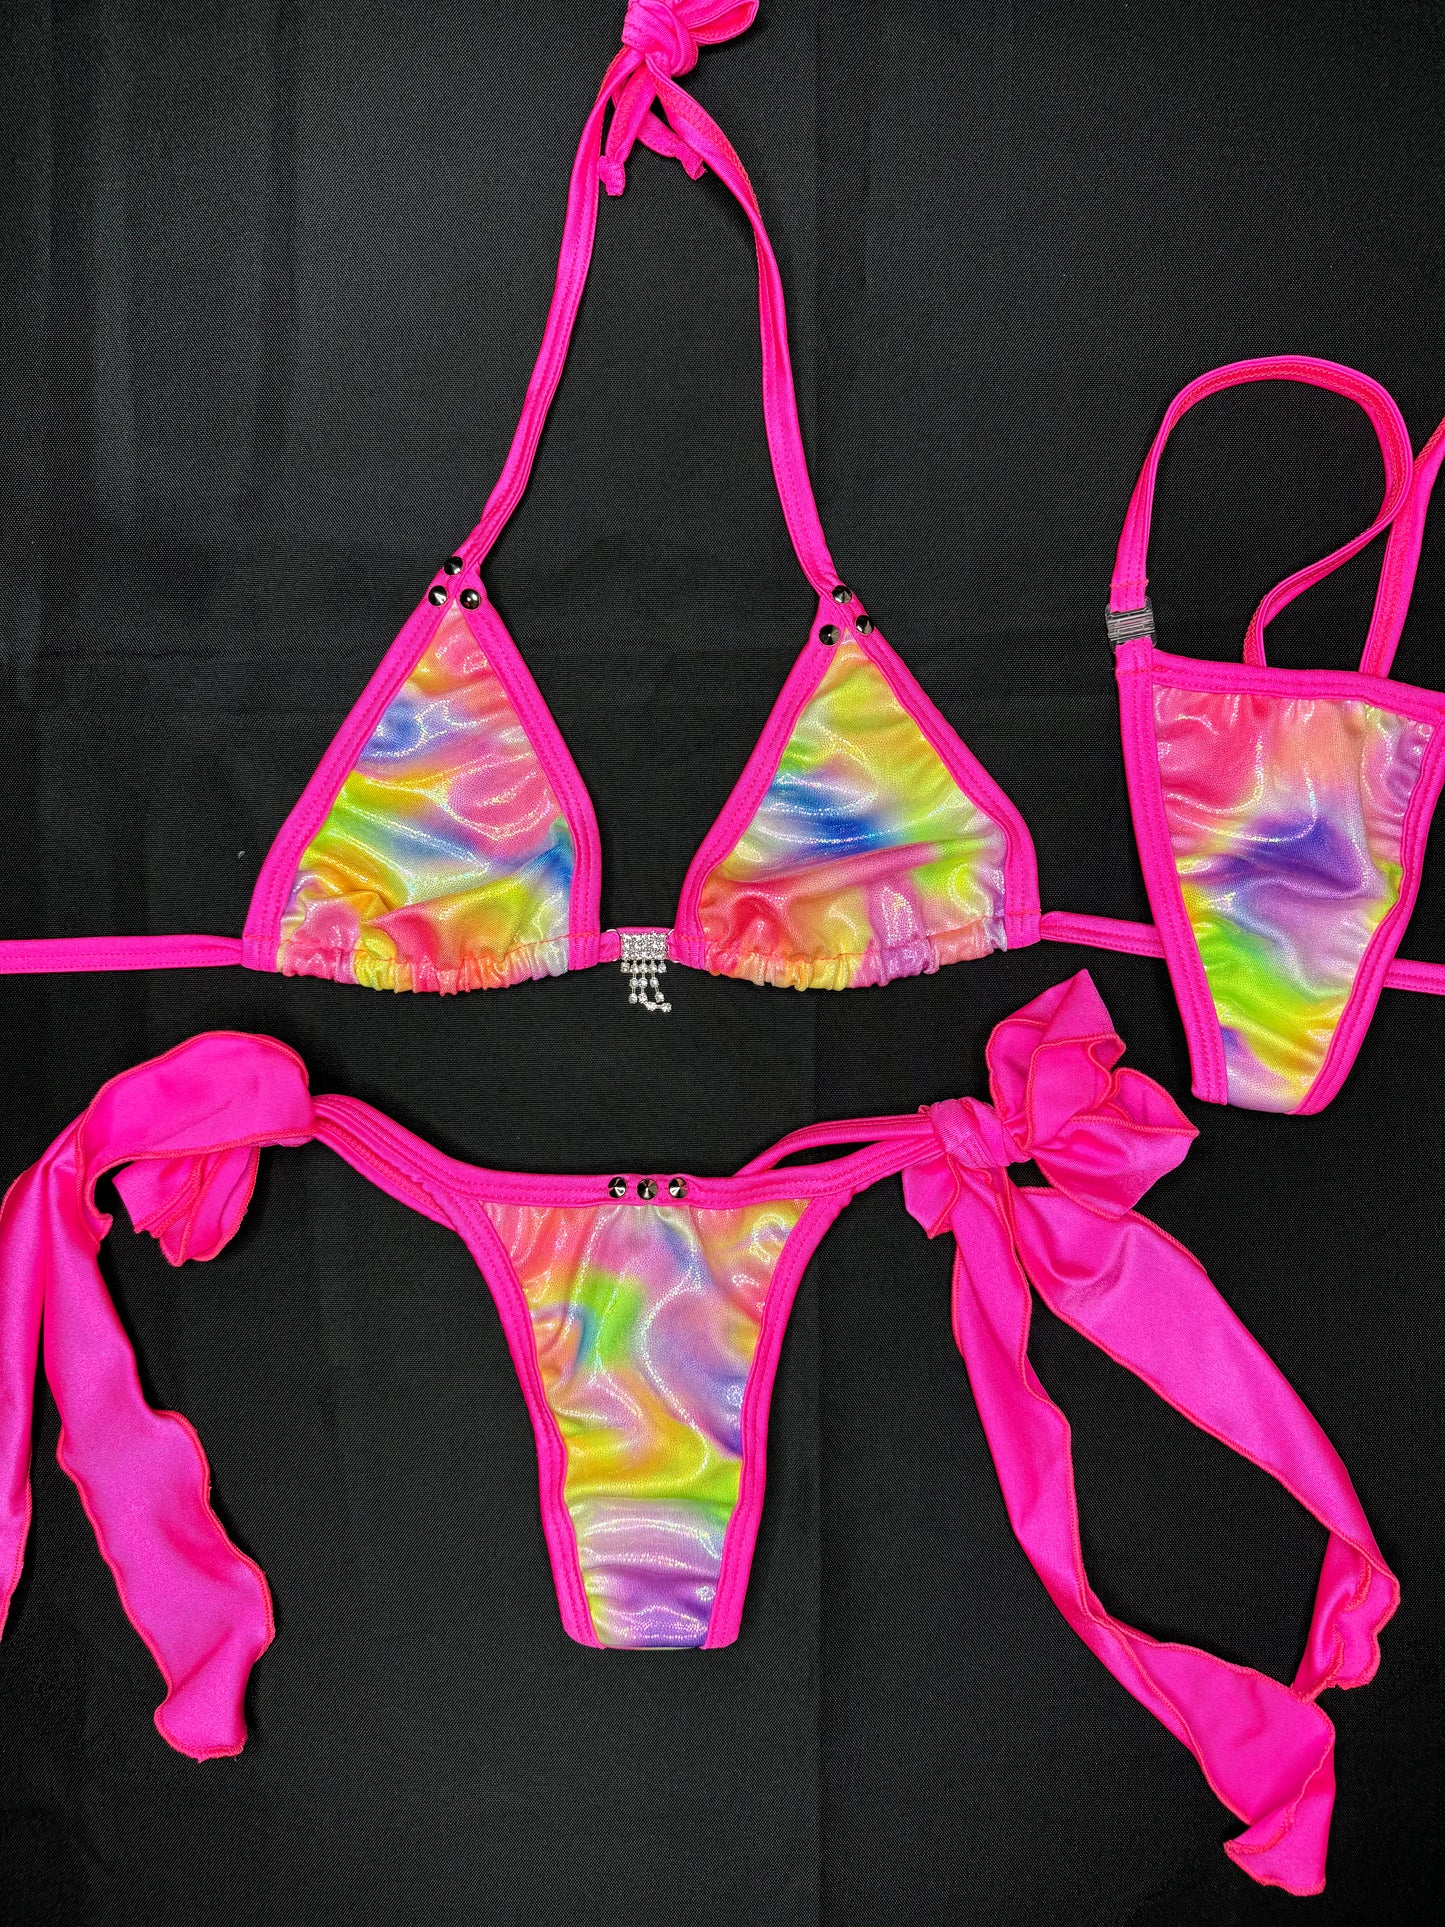 Hot Pink/Mystic Rainbow Two-Piece Lingerie Bikini Outfit